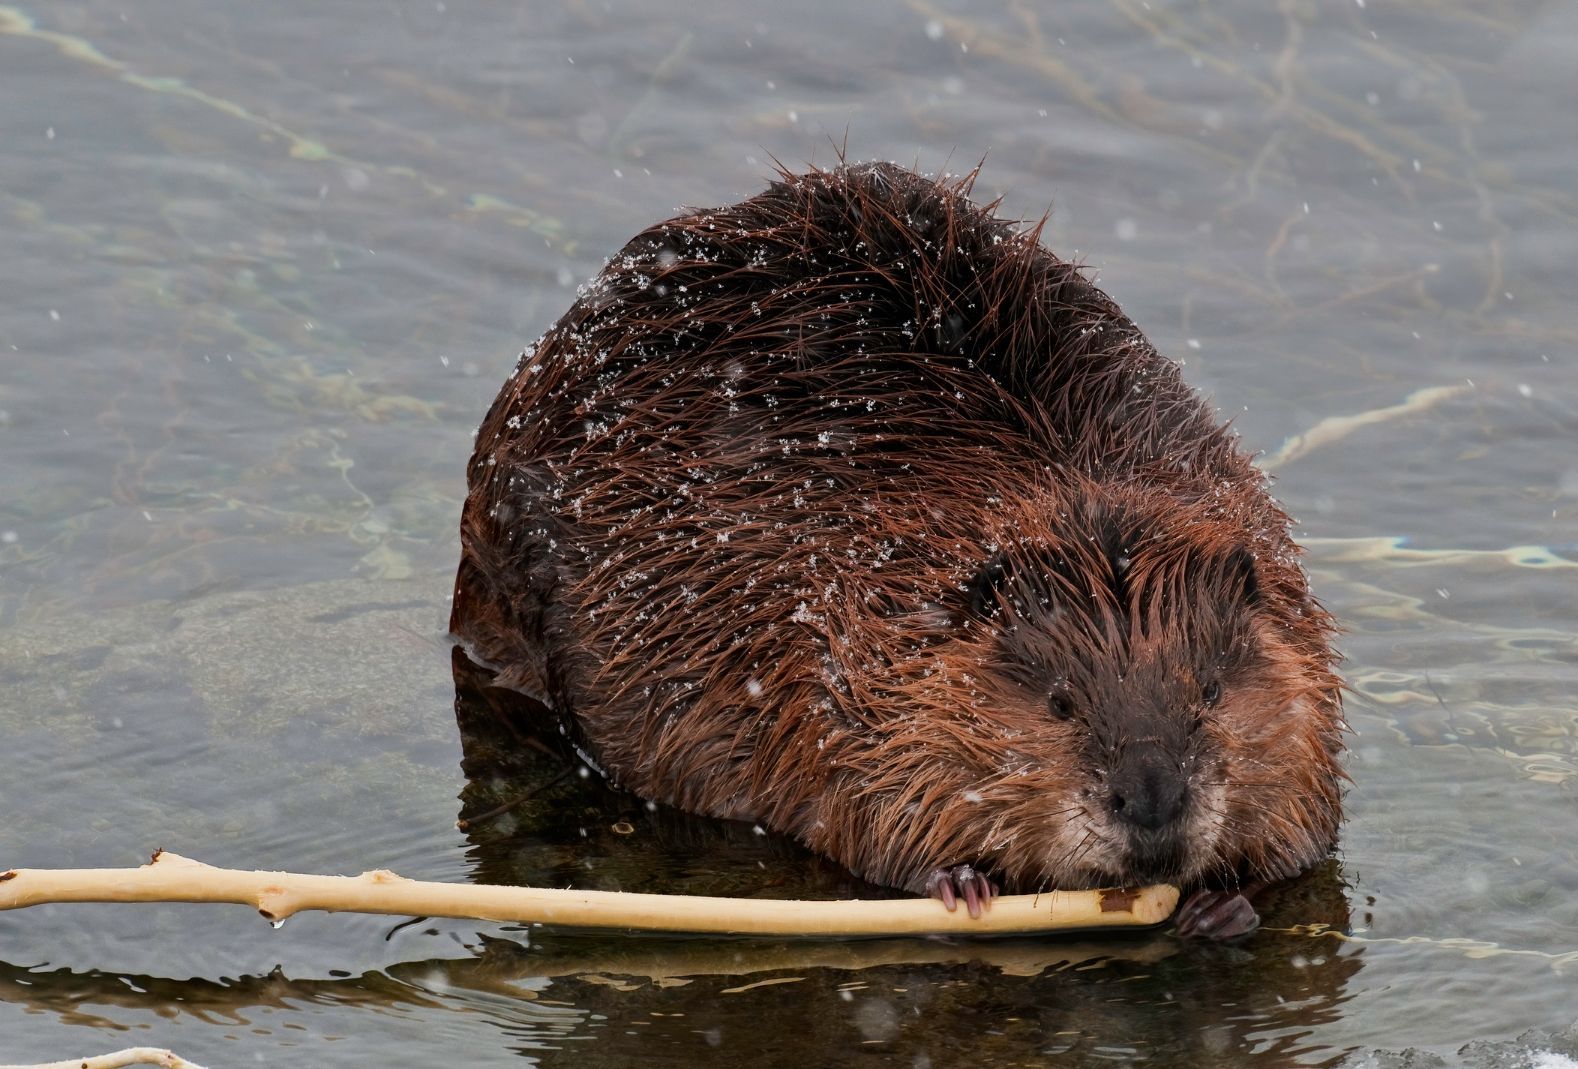 A North American beaver nibbling a branch in the river at Yellowstone National Park.